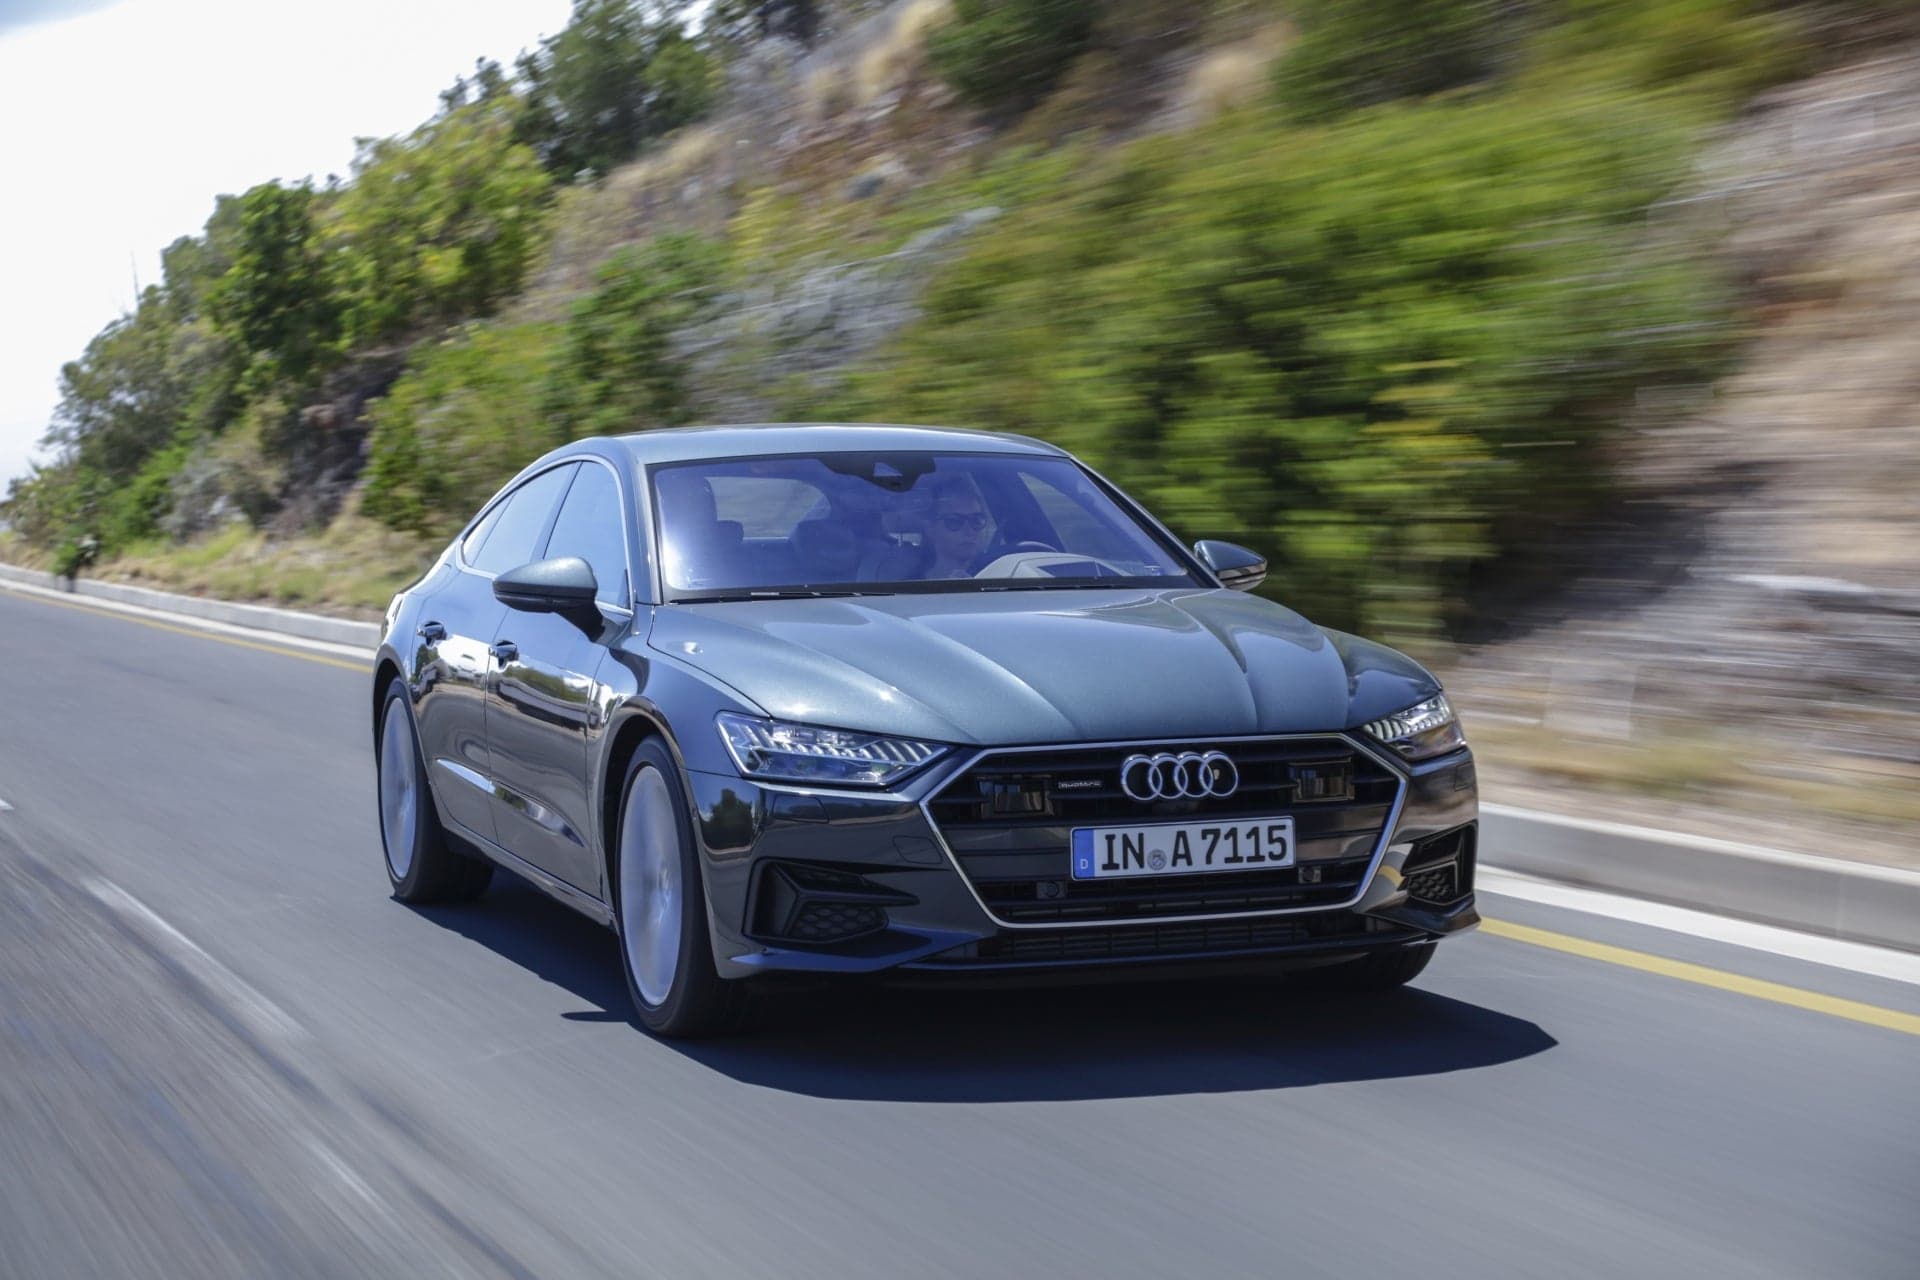 2019 Audi A7 Sportback: Cheaper Than Before With Luxury and Safety Aplenty